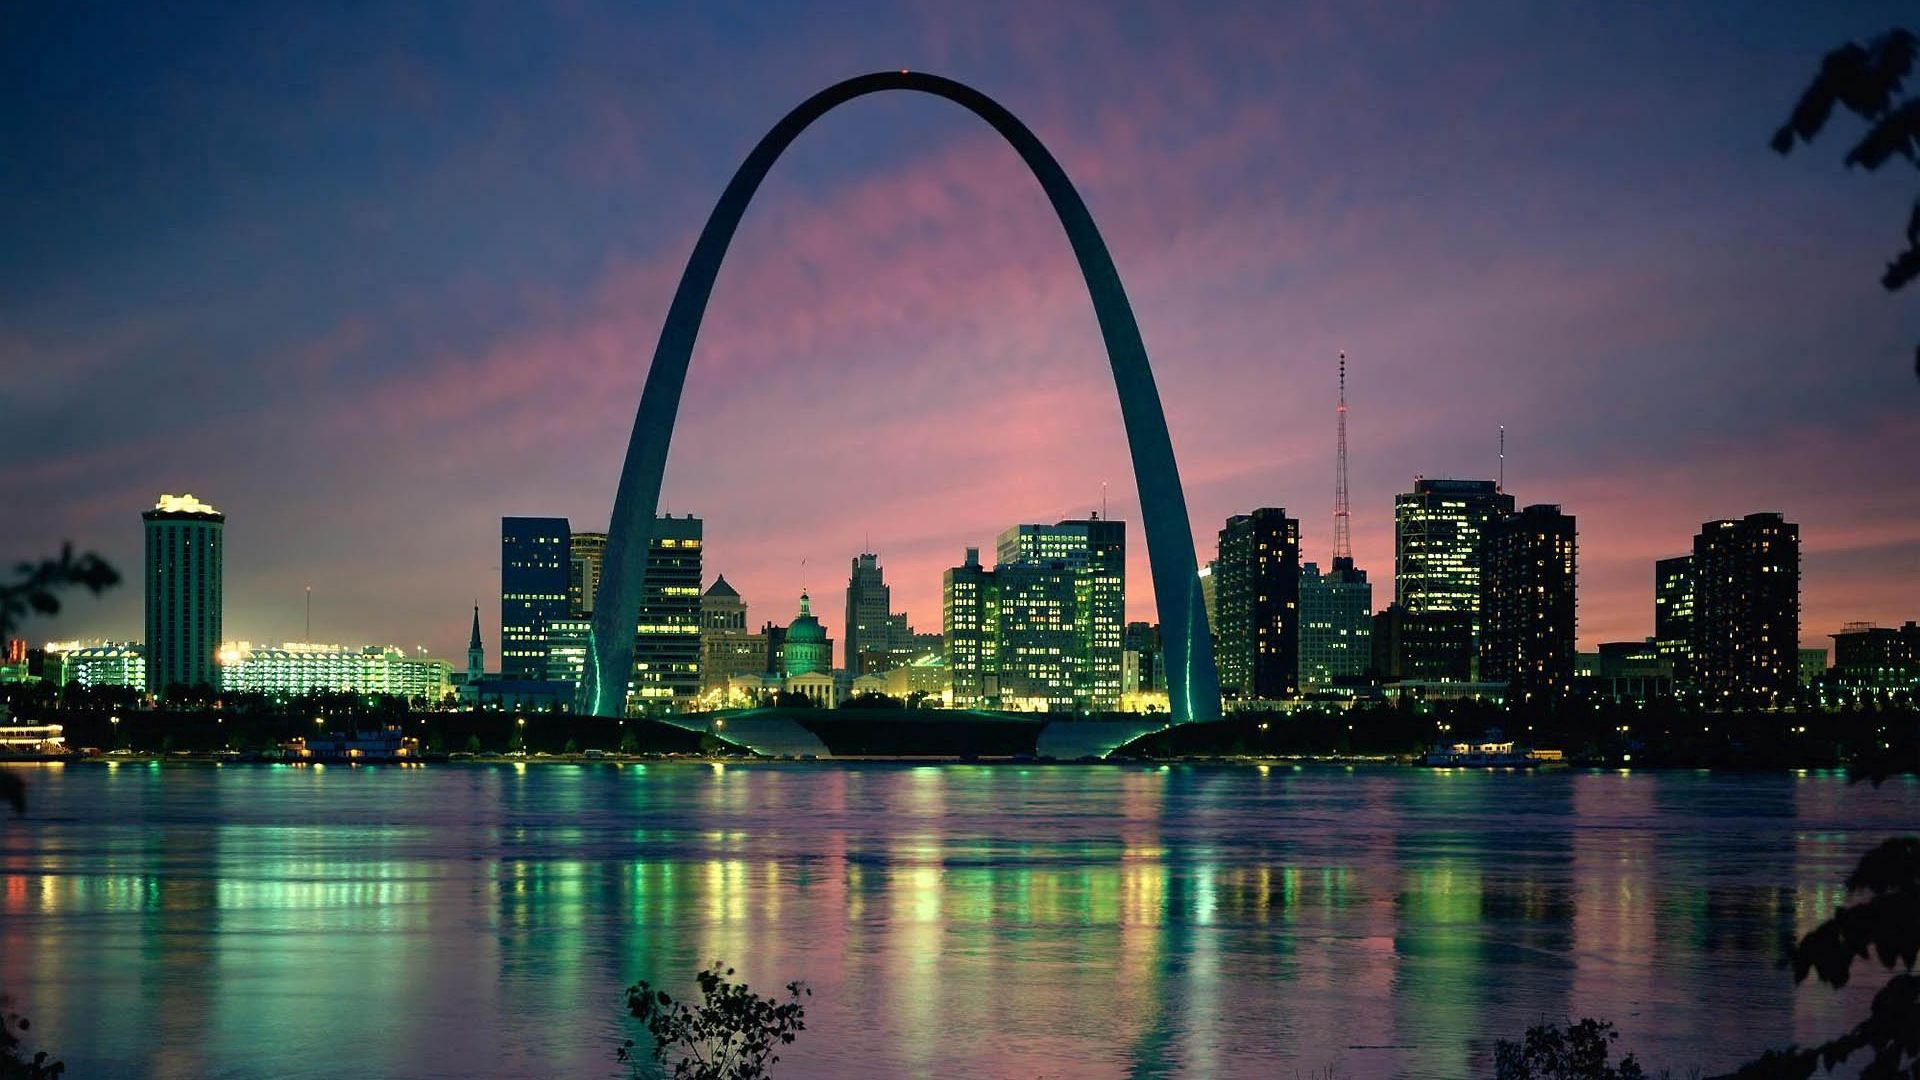 gate of the west, arch, cities, usa, building, bridge, evening, united states, st louis